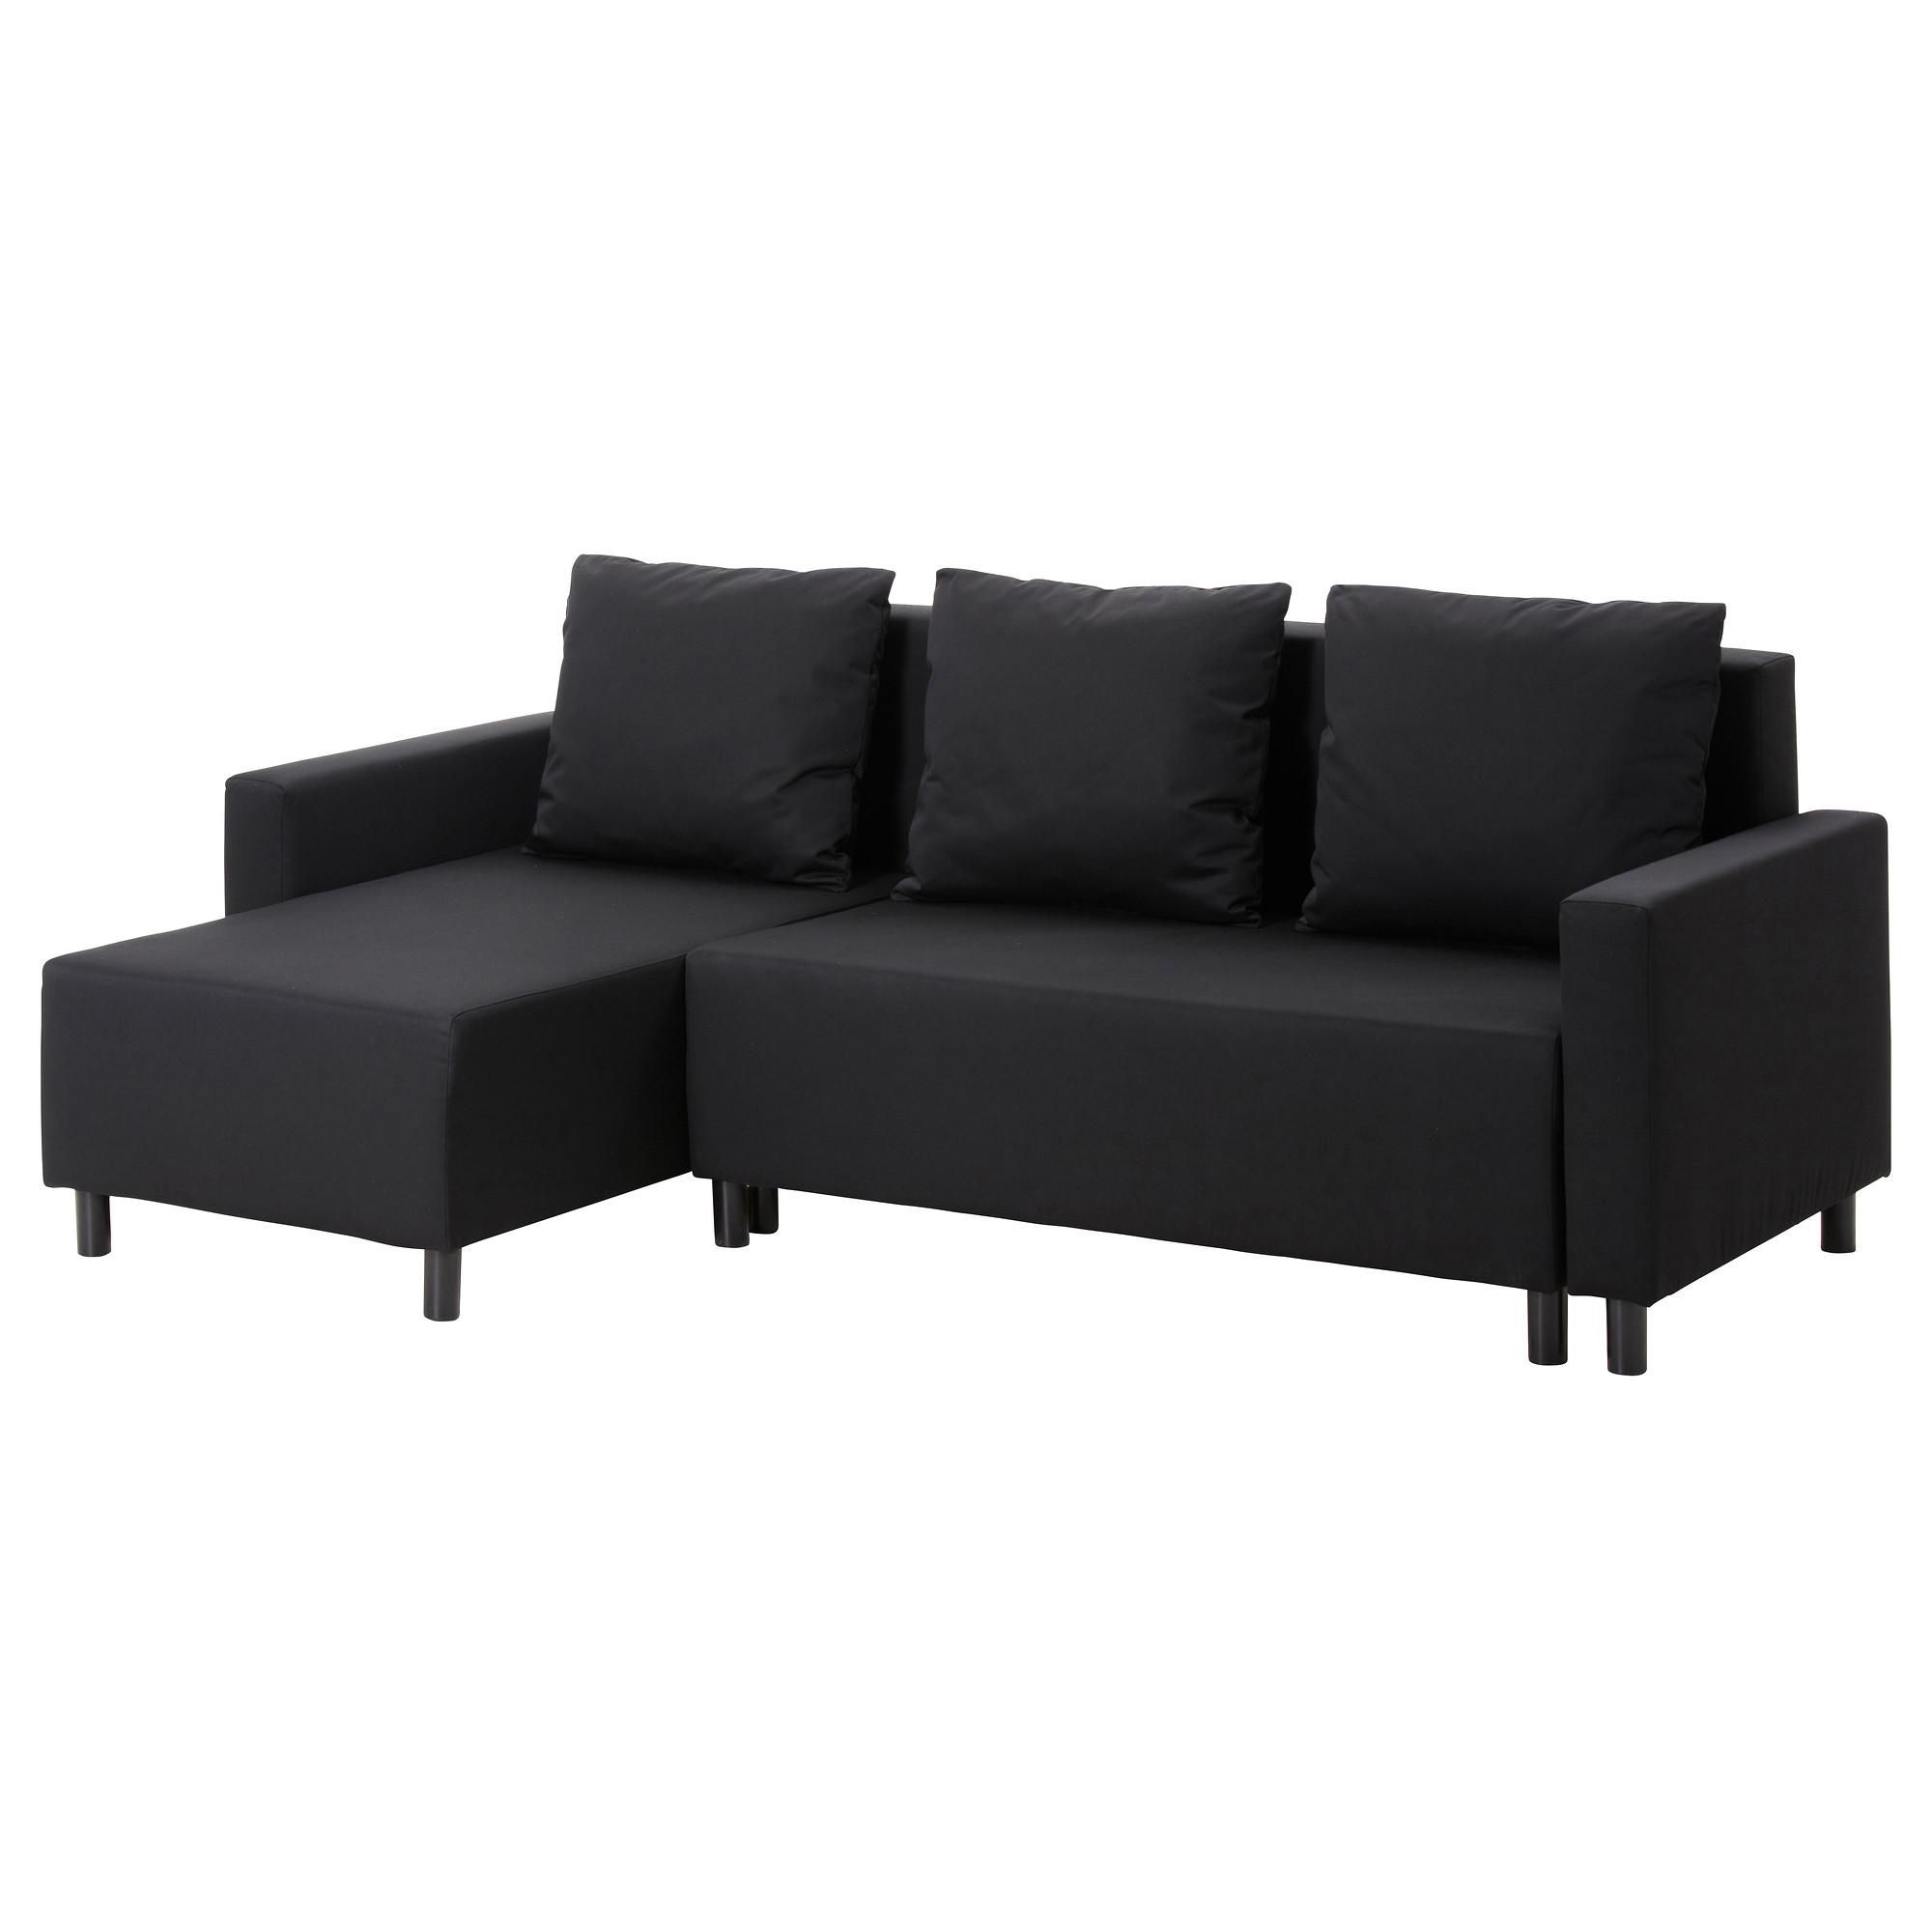 Sofa Beds & Futons – Ikea Throughout King Size Sofa Beds (View 18 of 20)